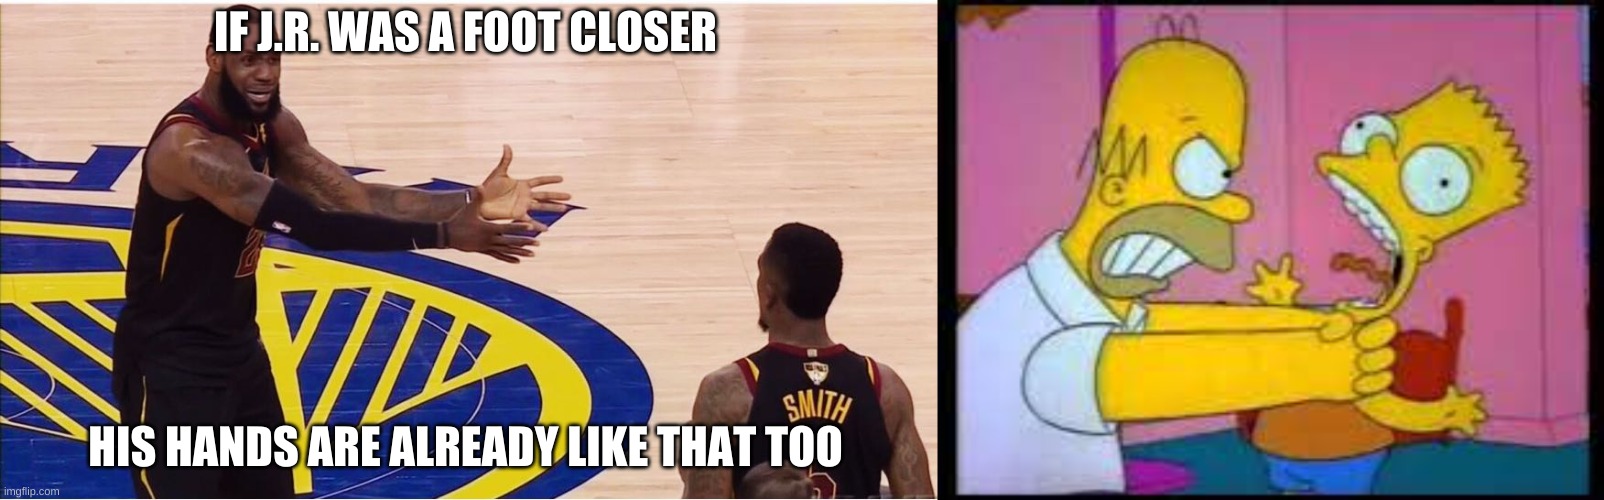 IF J.R. WAS A FOOT CLOSER; HIS HANDS ARE ALREADY LIKE THAT TOO | image tagged in lebron james jr smith | made w/ Imgflip meme maker